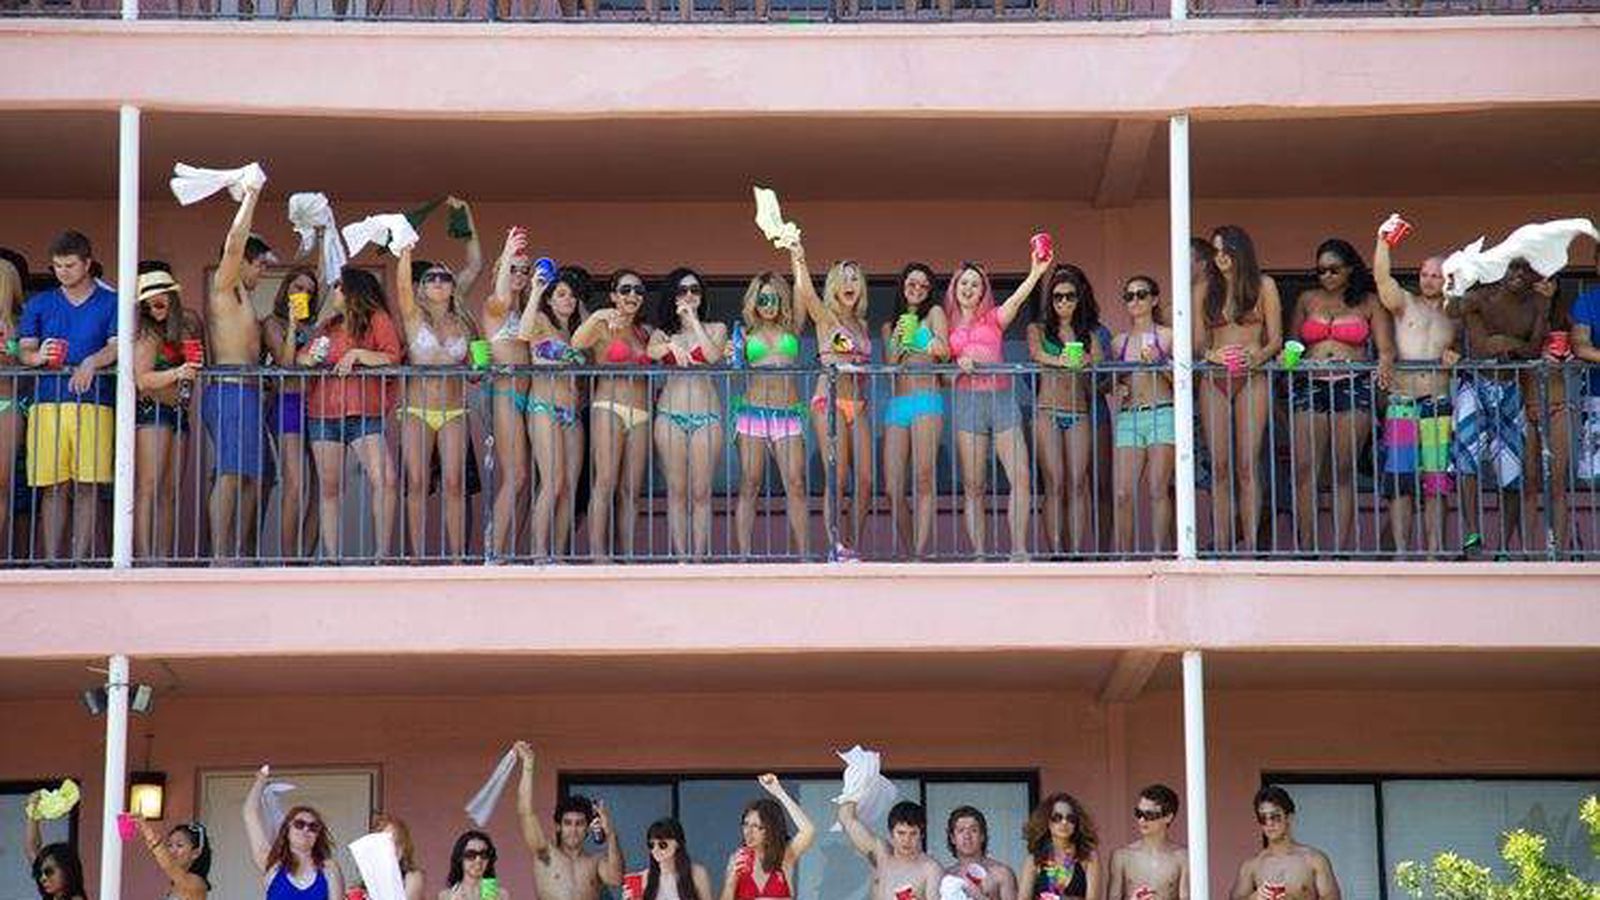 Spring Breakers' gives, violent image of St. Pete Beach